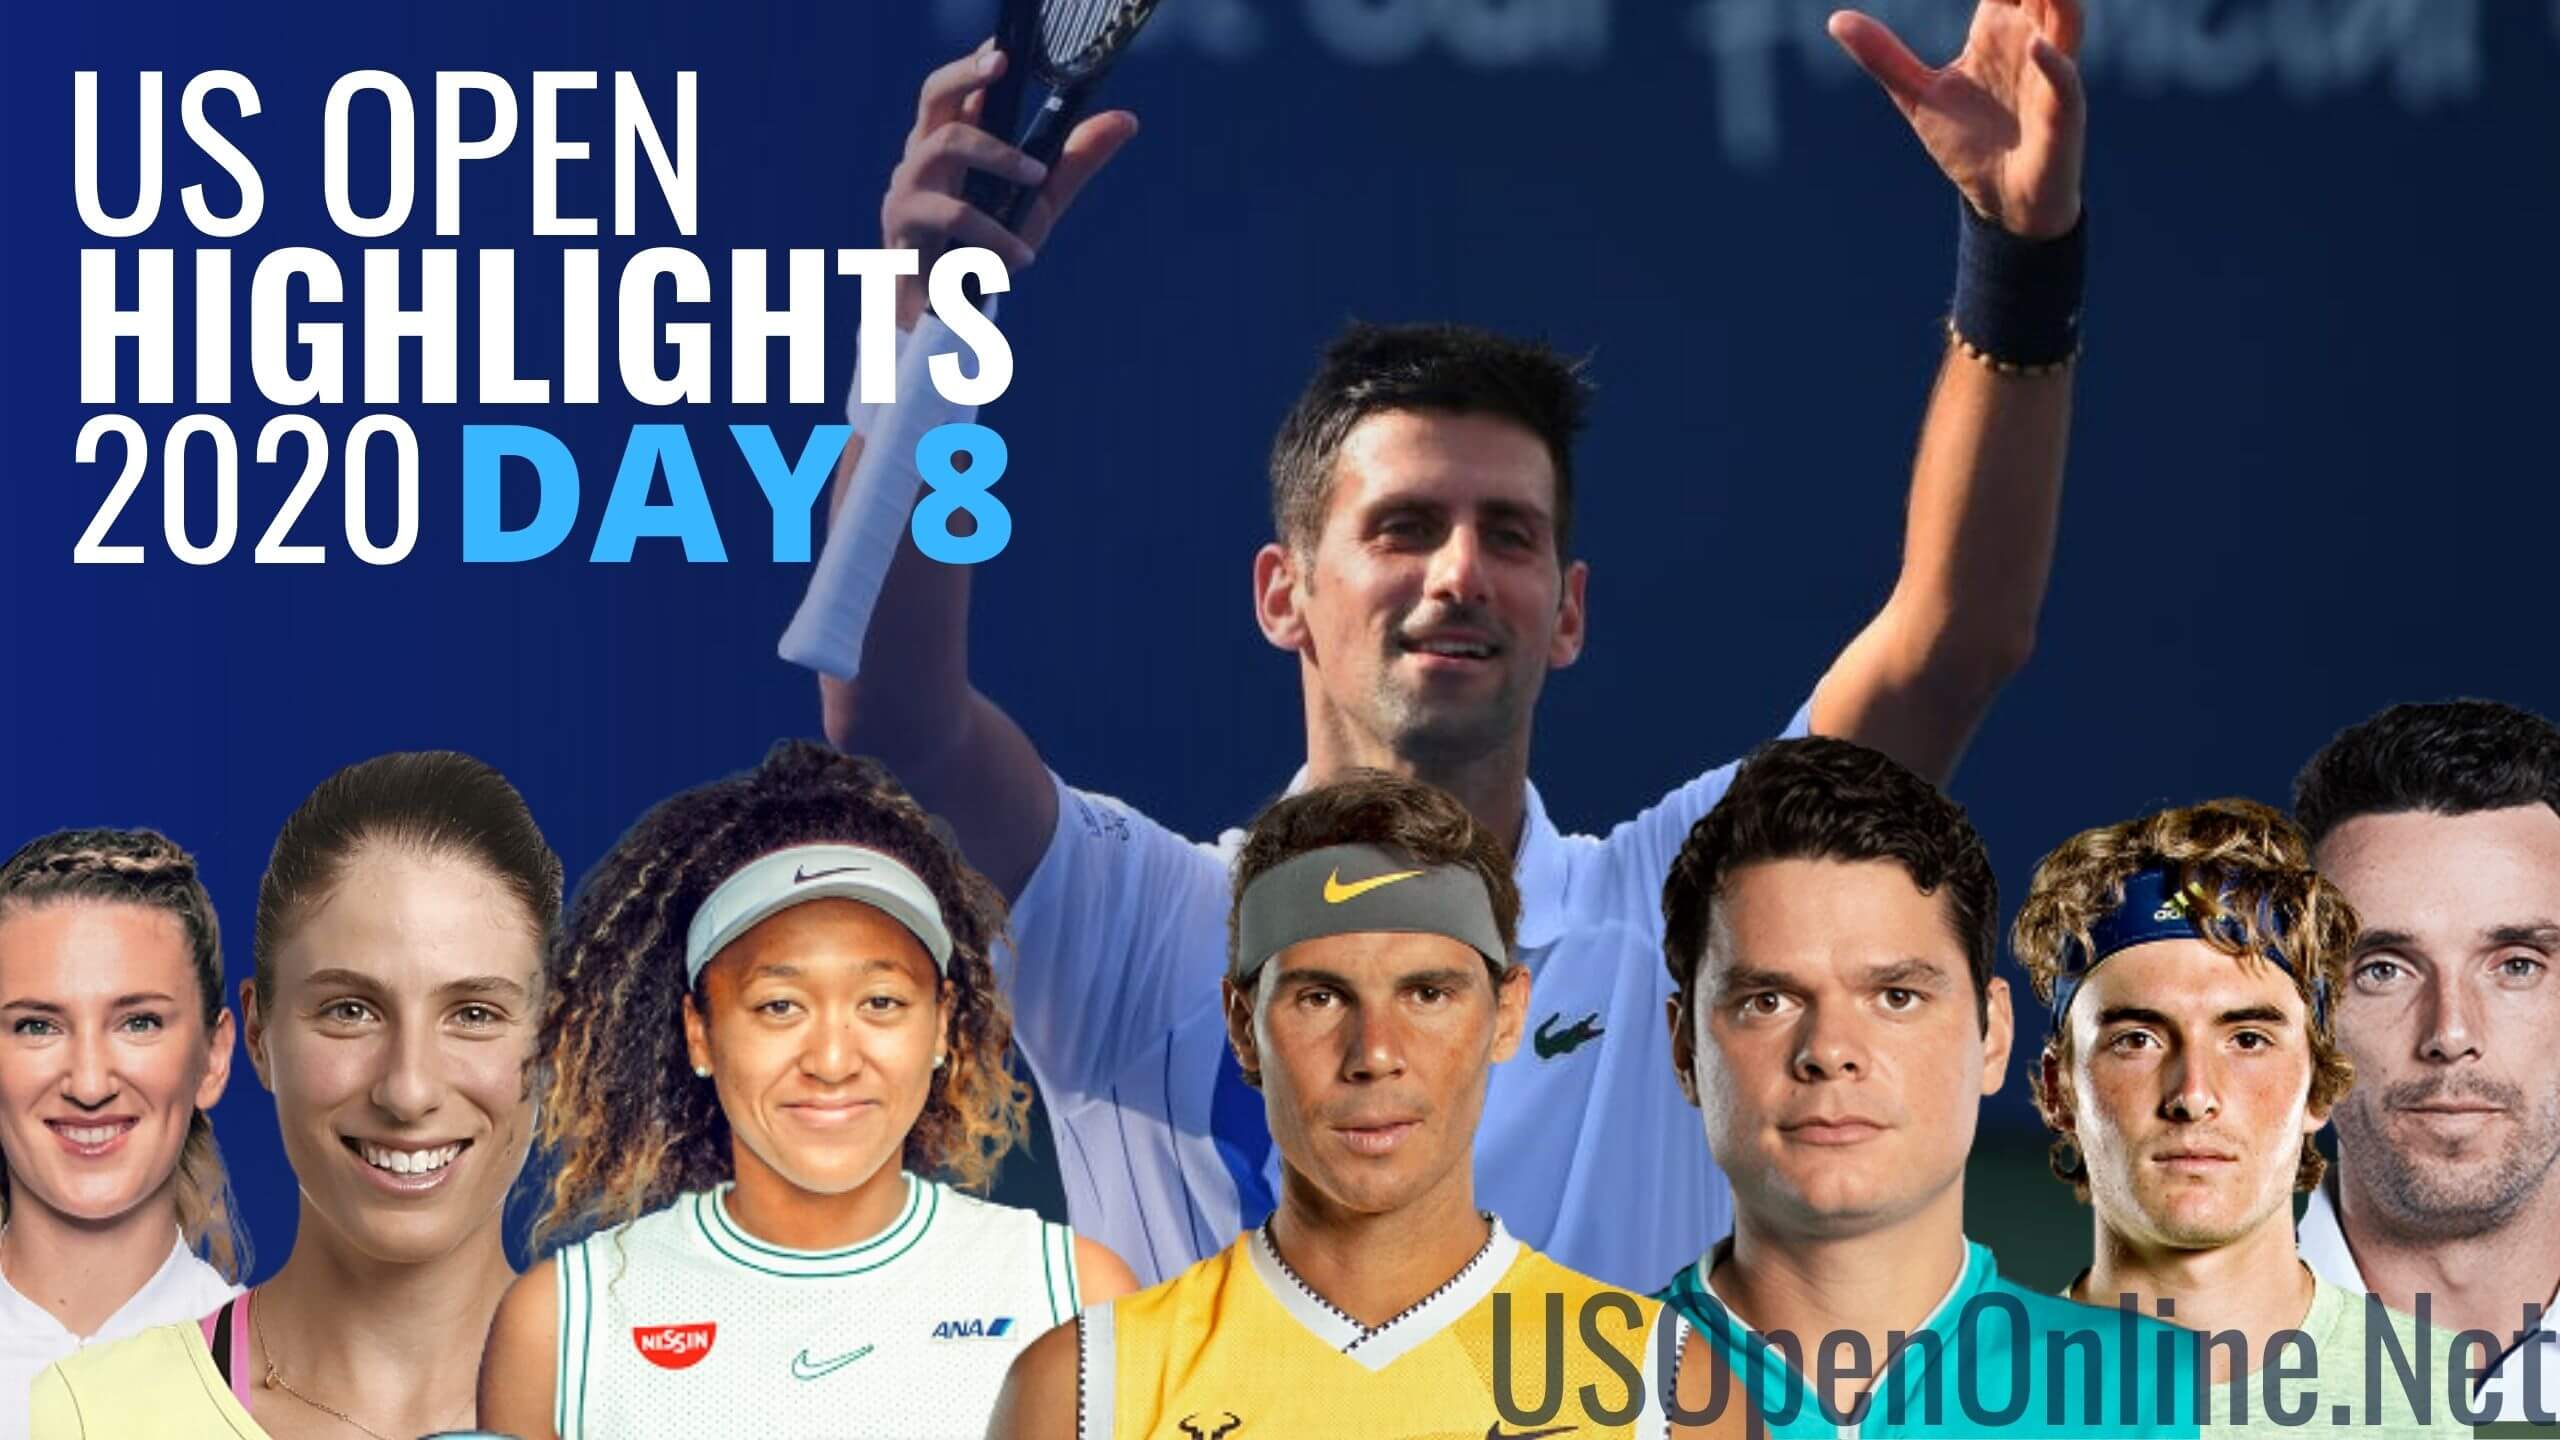 US Open Tennis 2020 Day 8 Complete Match Highlights